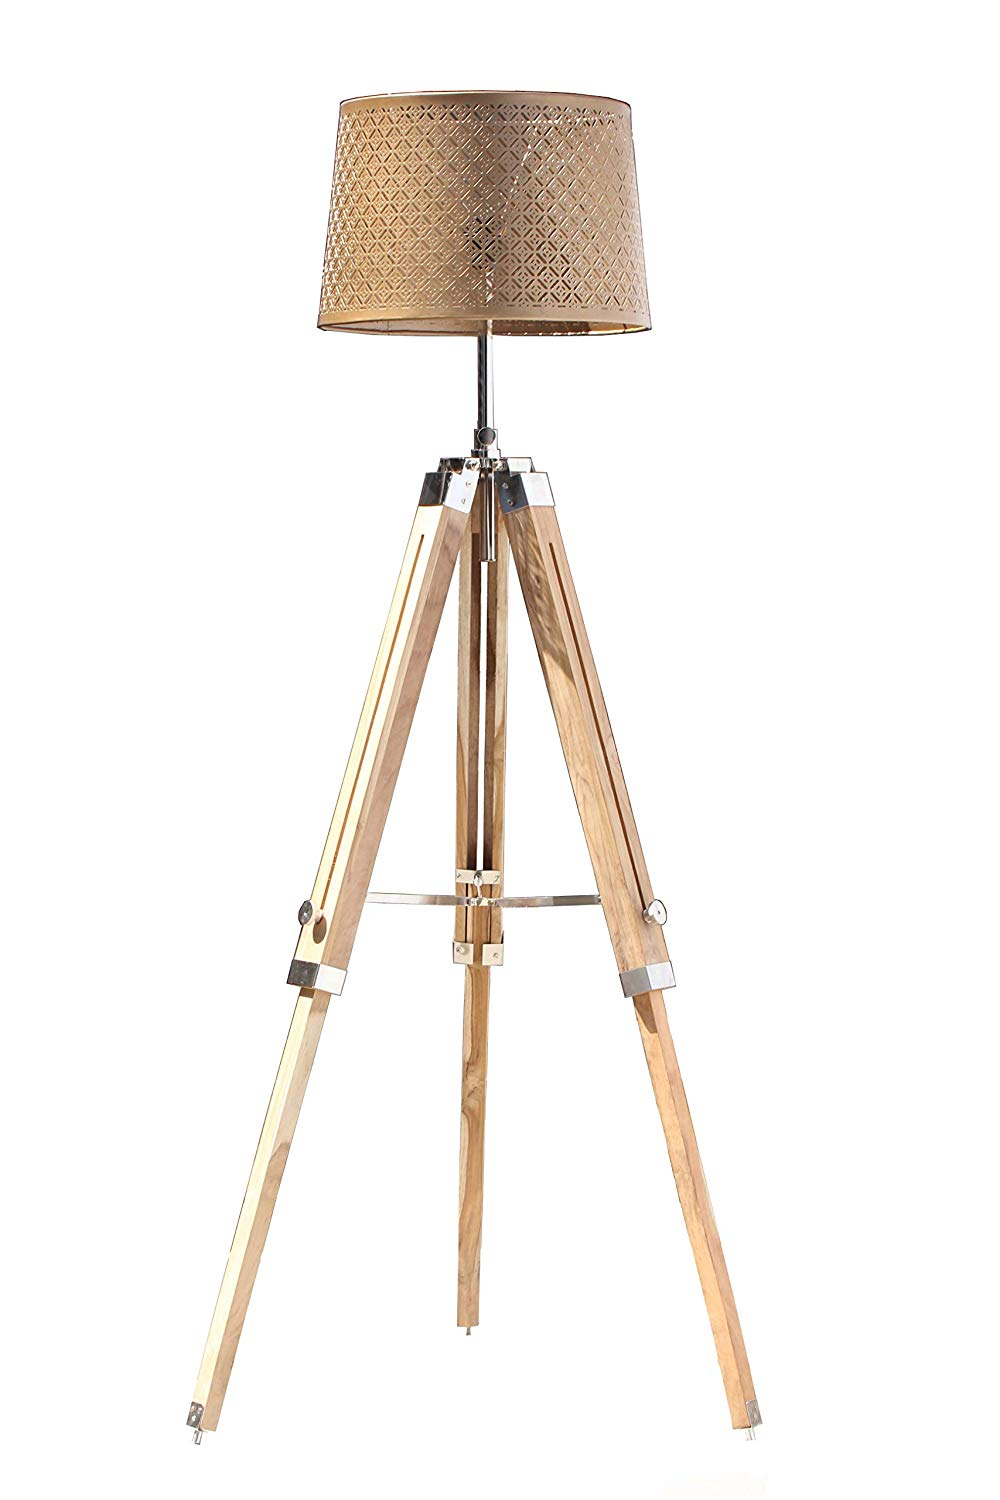 Nautical Teak Wood Floor Lamp Tripod Stand Home Decor intended for dimensions 1000 X 1500